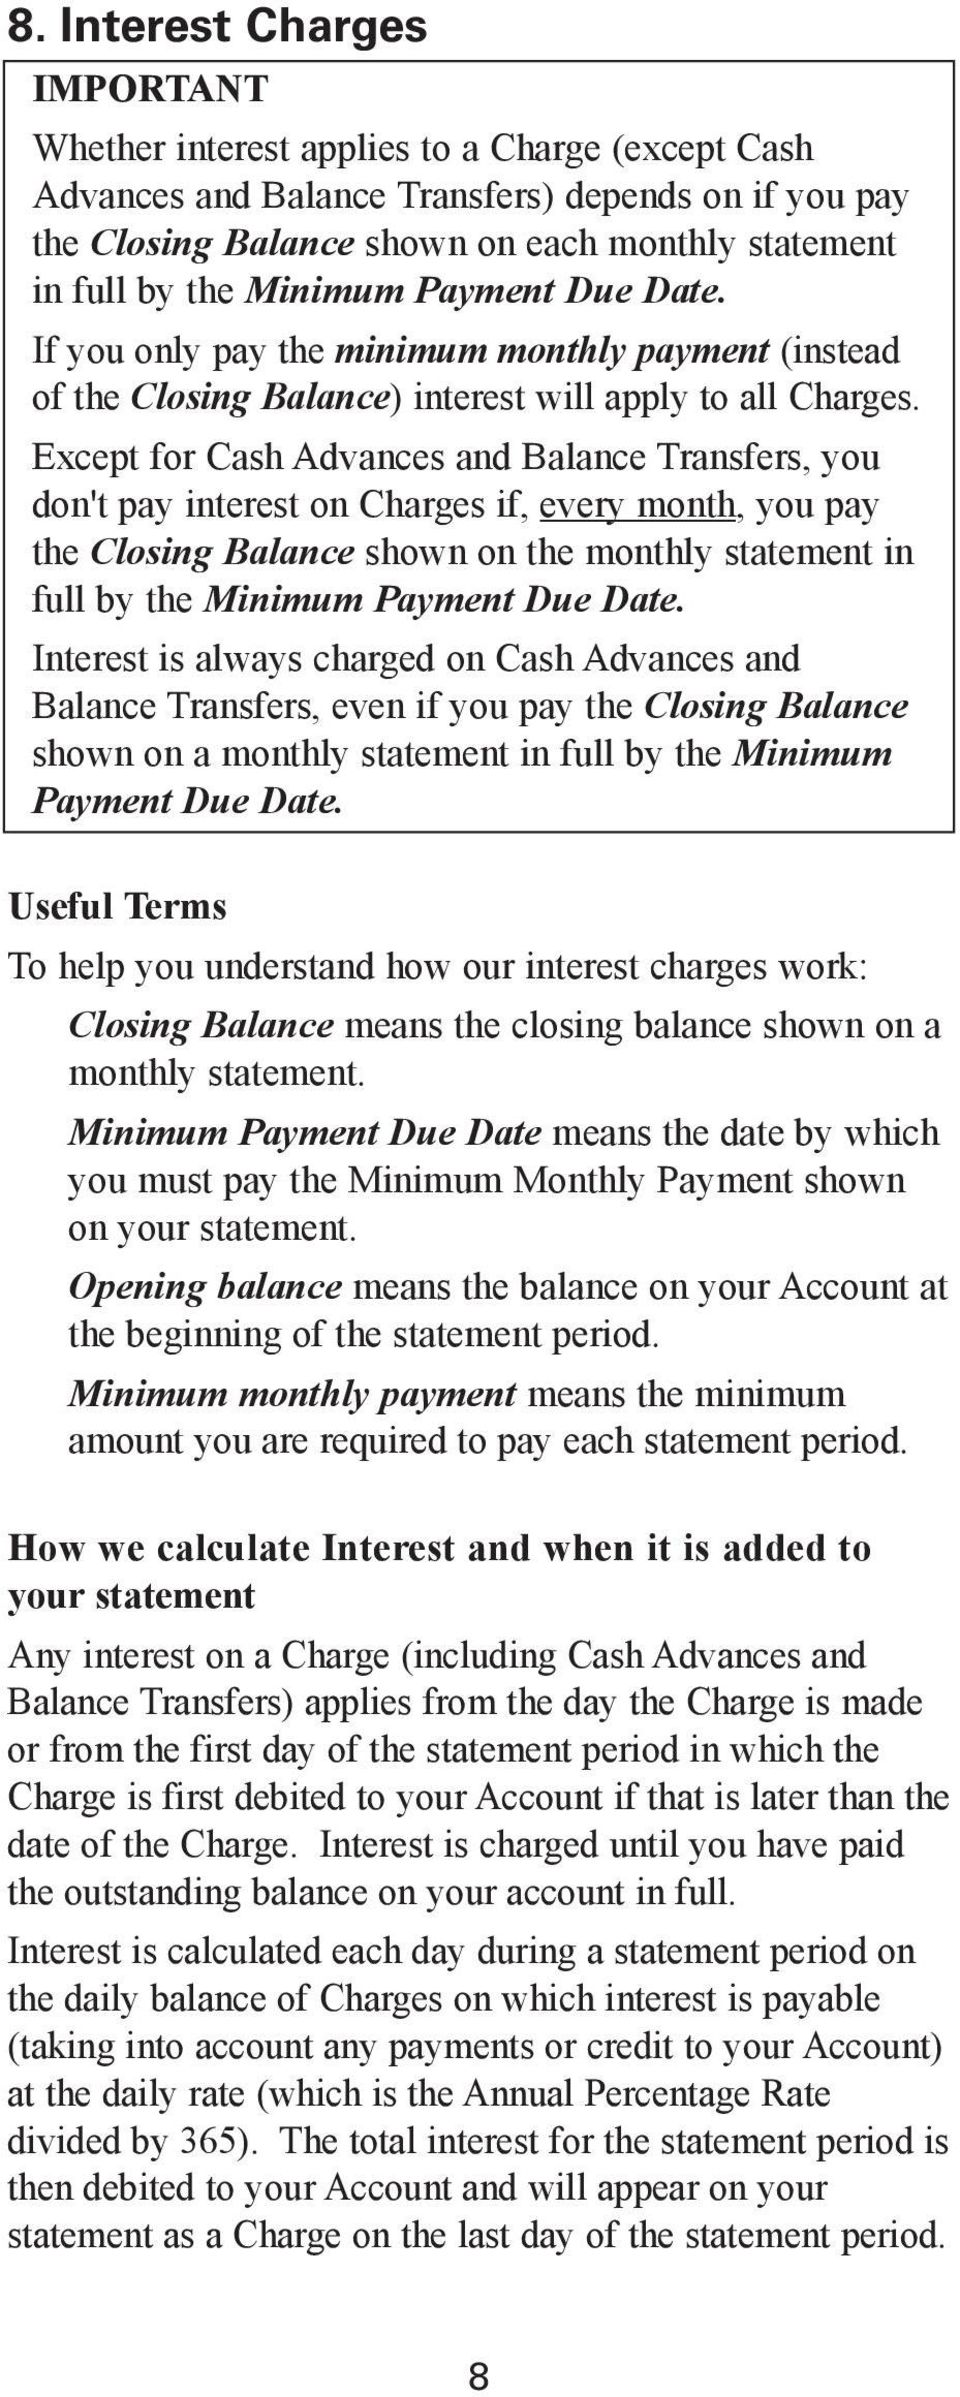 Except for Cash Advances and Balance Transfers, you don't pay interest on Charges if, every month, you pay the Closing Balance shown on the monthly statement in full by the Minimum Payment Due Date.